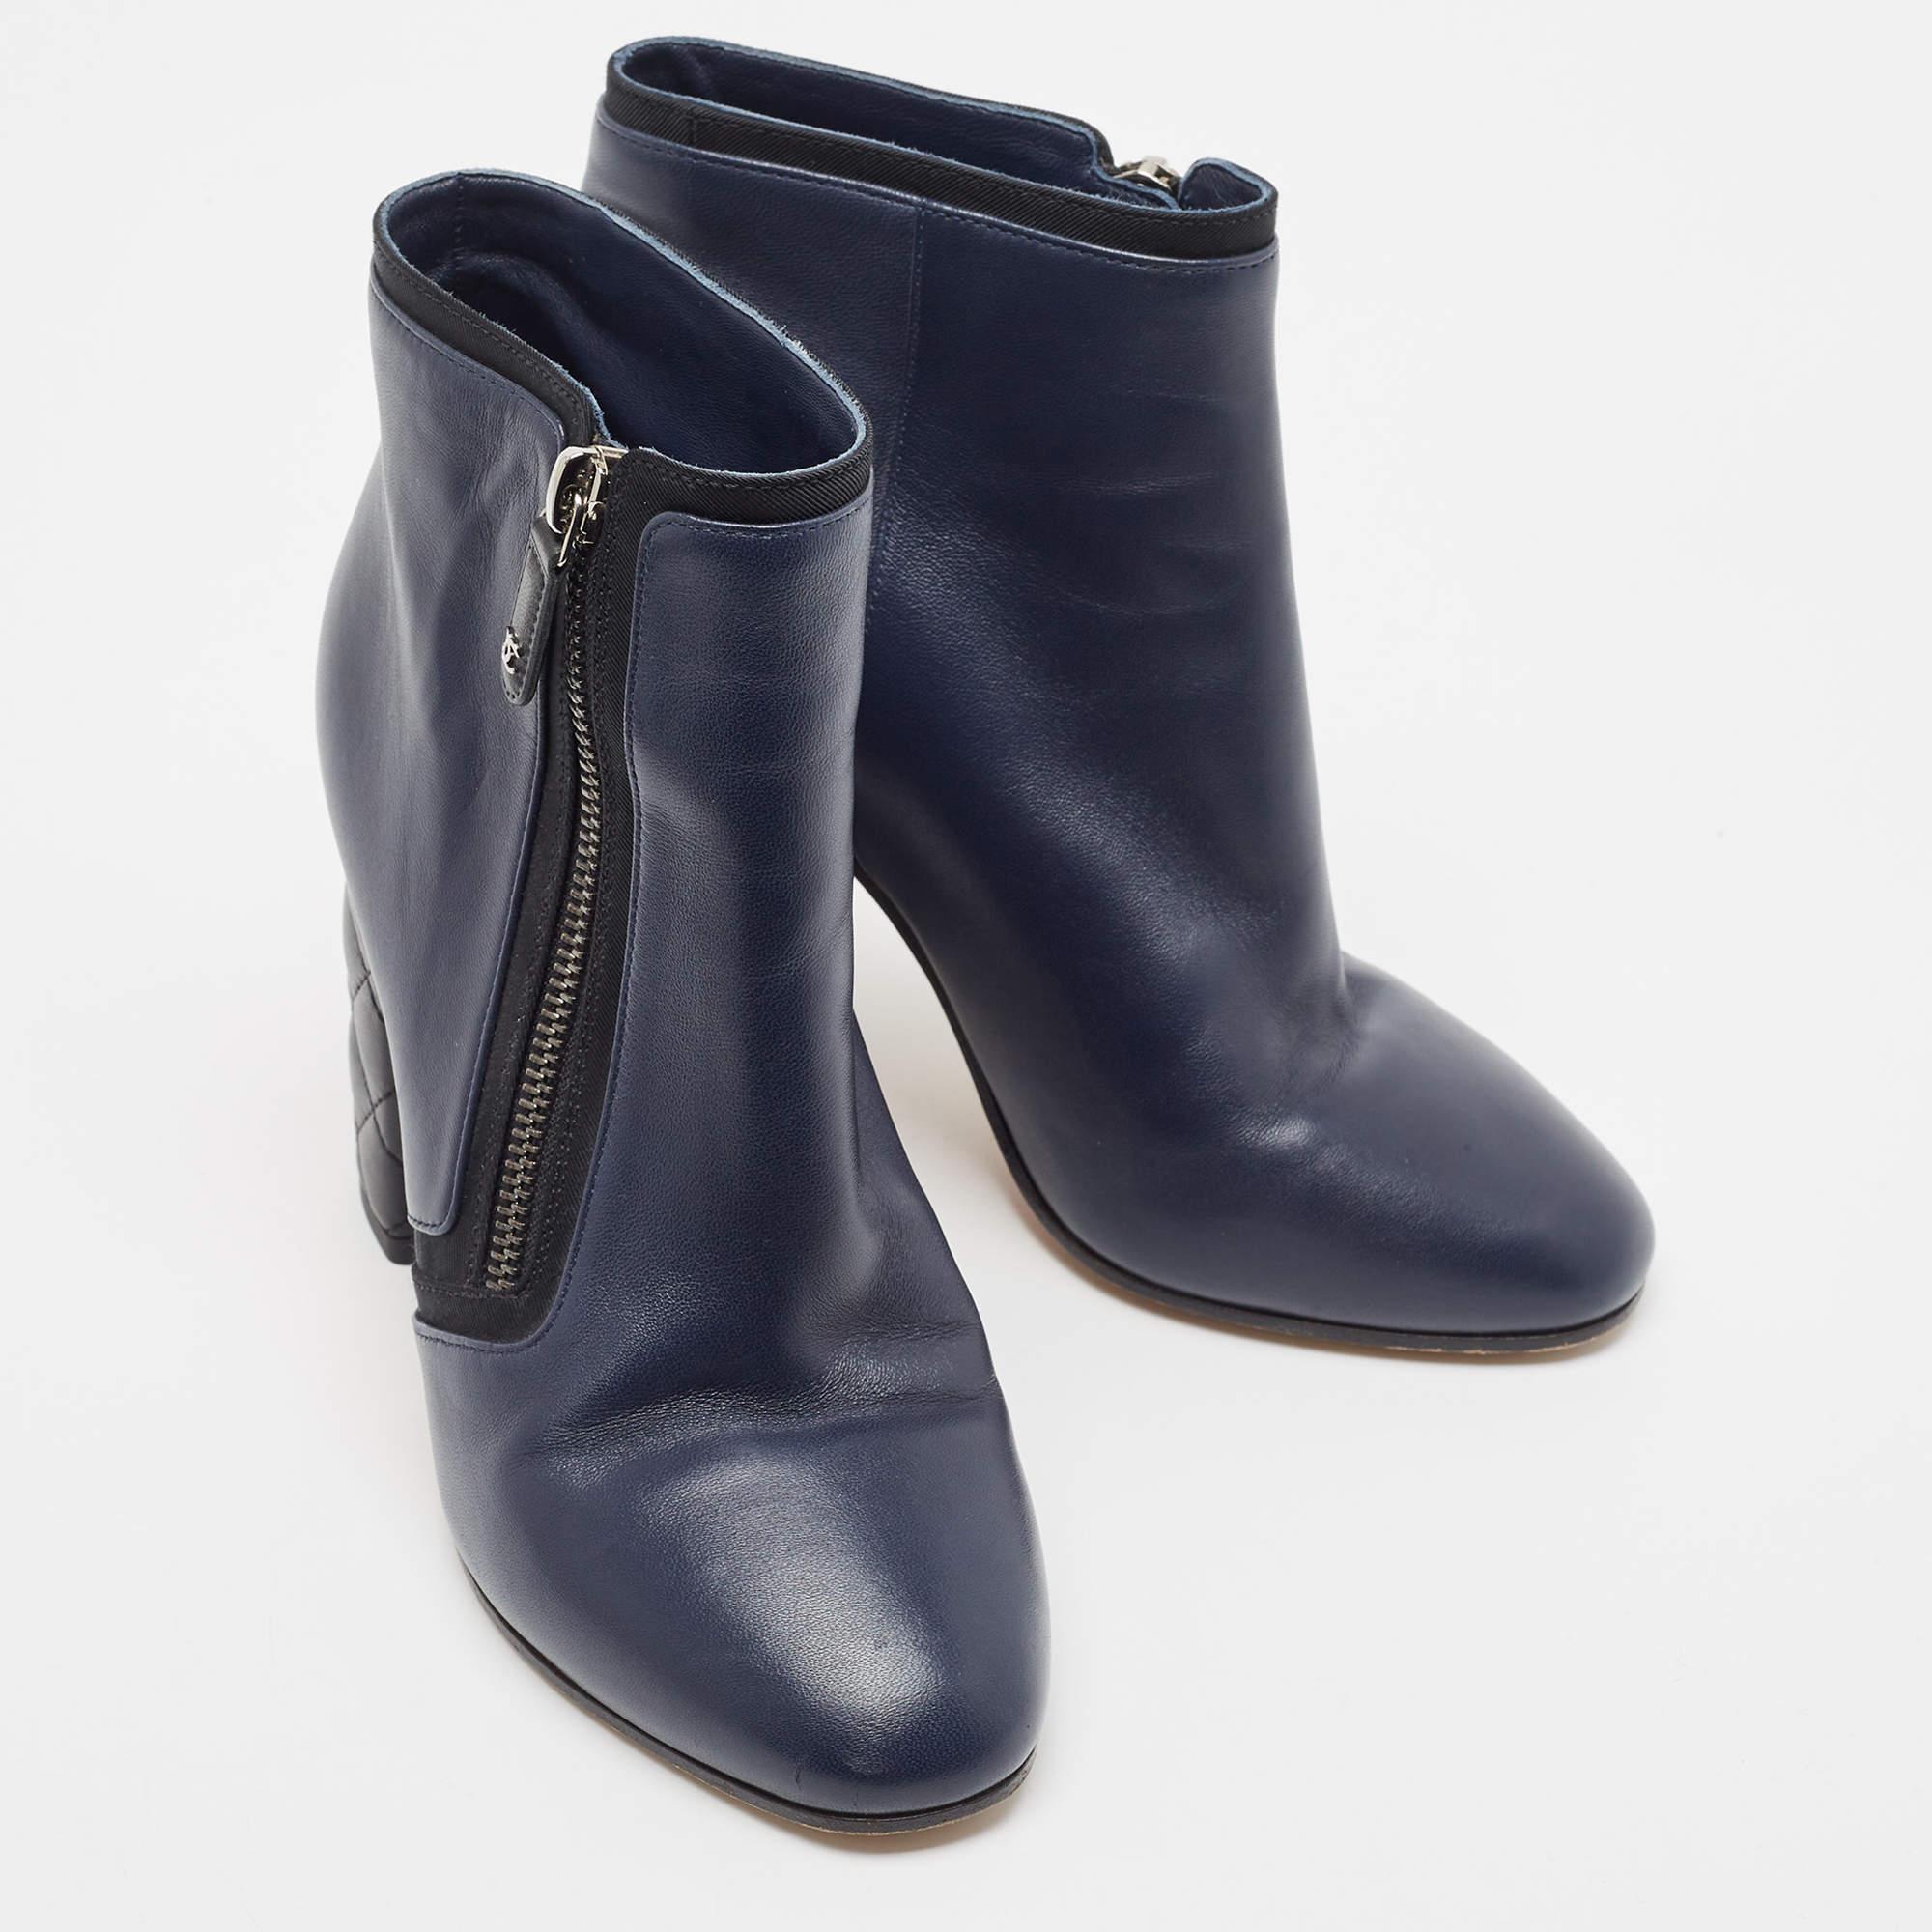 Perfectly sewn and finished to ensure an elegant look and fit, these Chanel ankle boots are a purchase you'll love flaunting. They look great on the feet.

